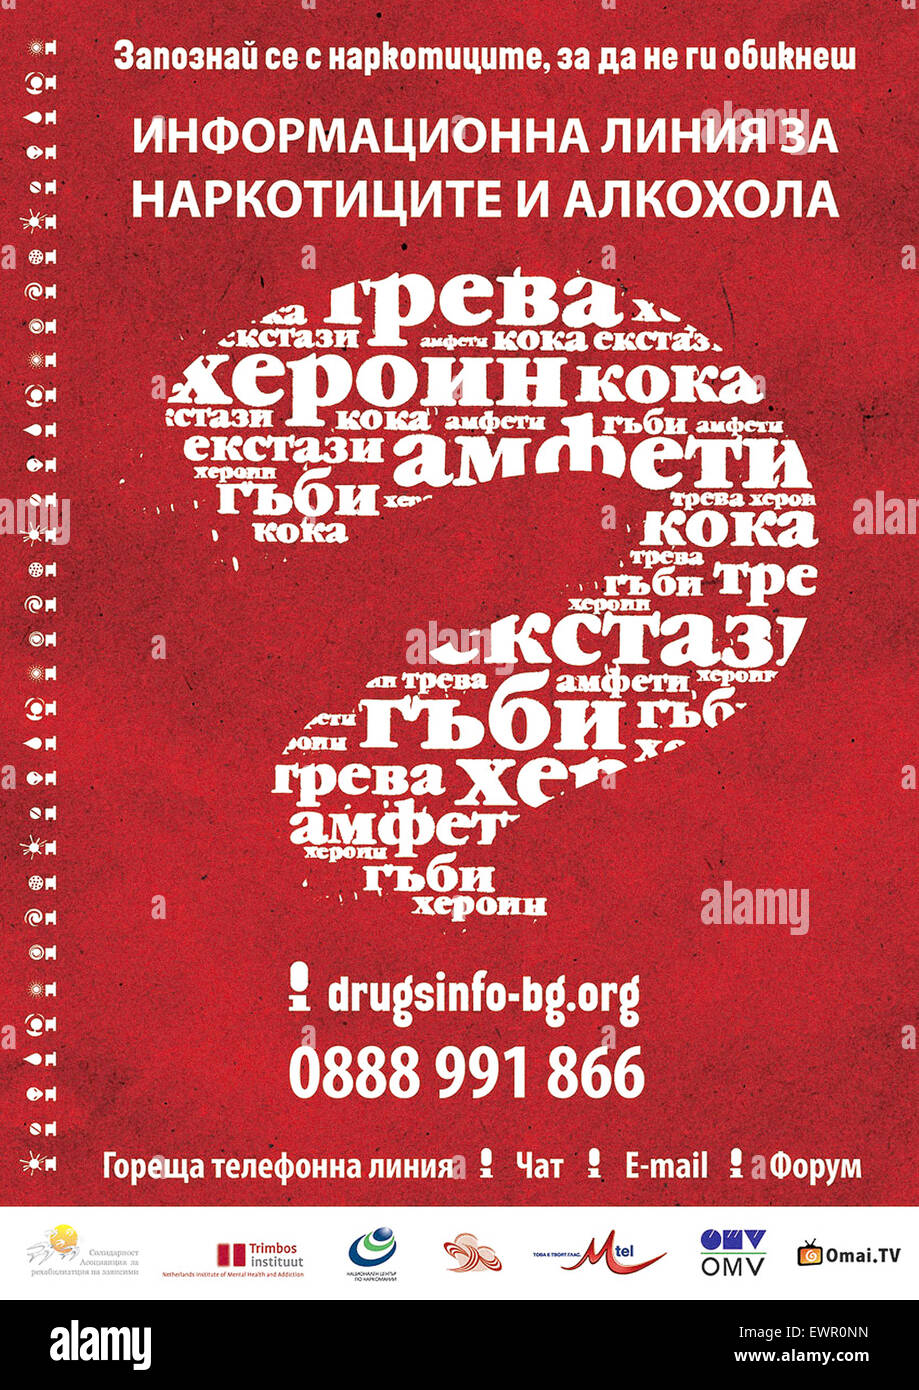 Poster from the Bulgarian National Drugs and Alcohol Helpline and website released in 2009. See description for more information. Stock Photo